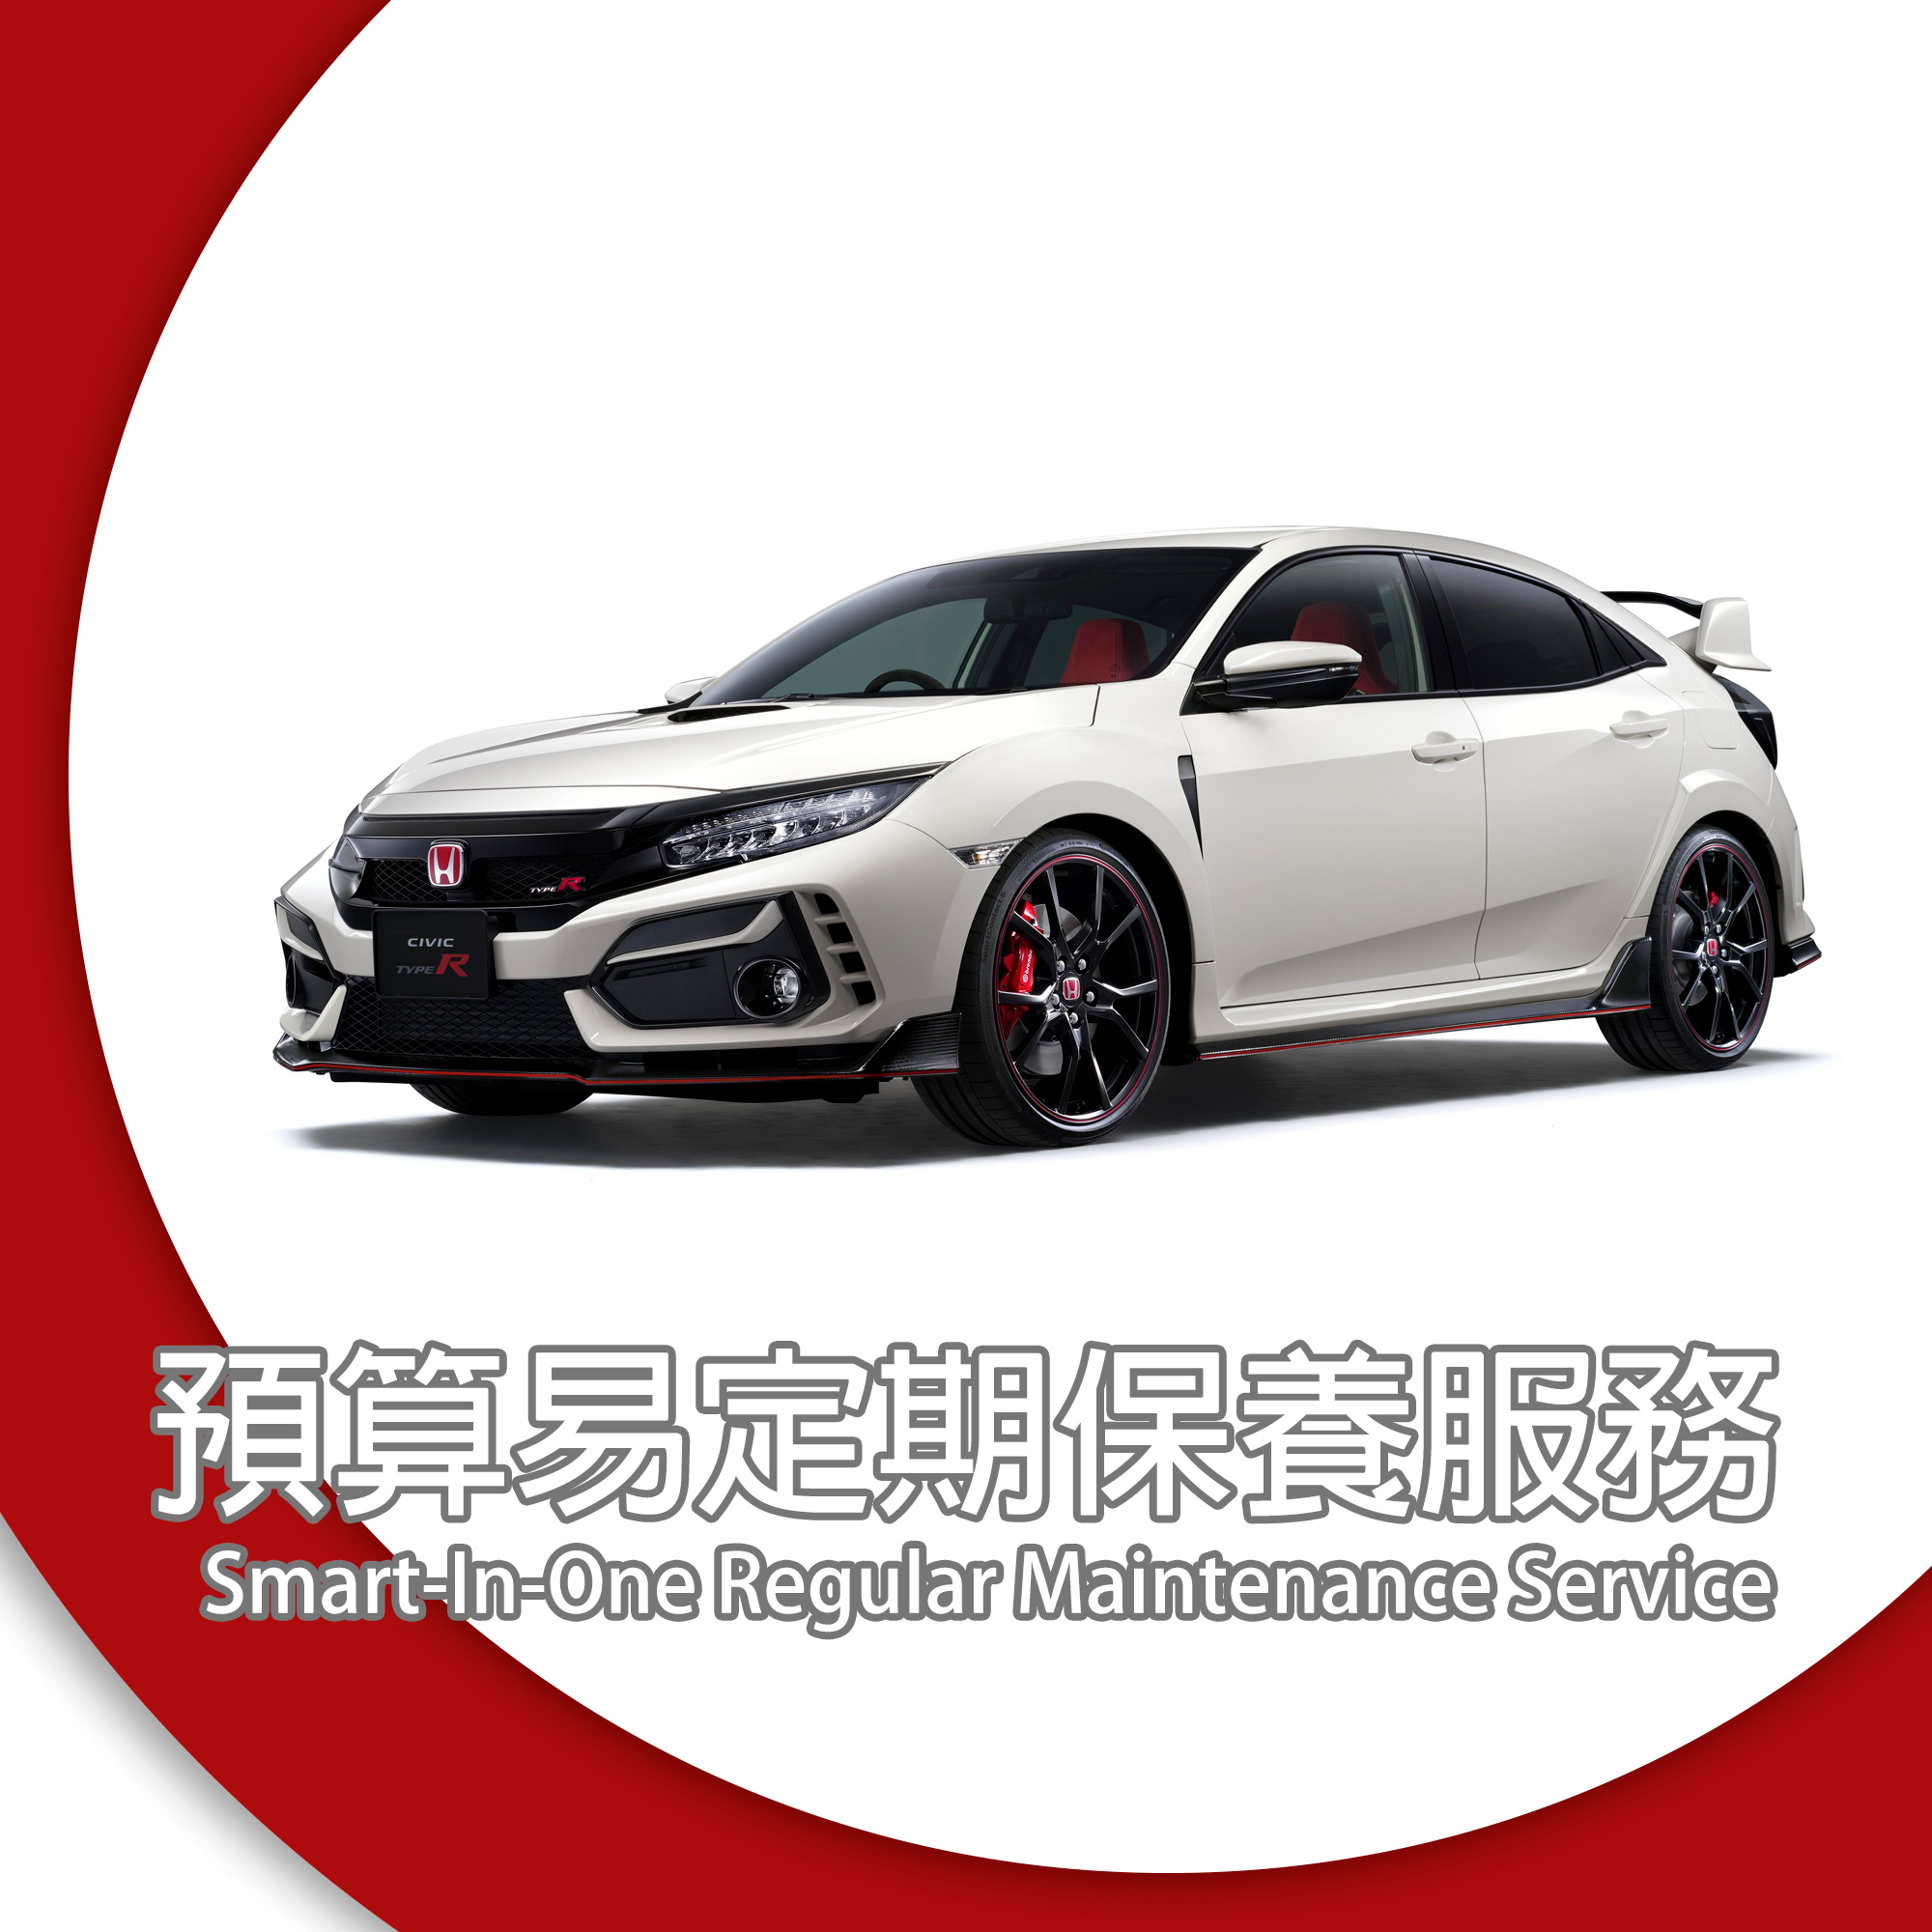 Civic Type R - Stand Maintenance Package Coupons 2 Set (Vehicle Age 1 - 36 Months)